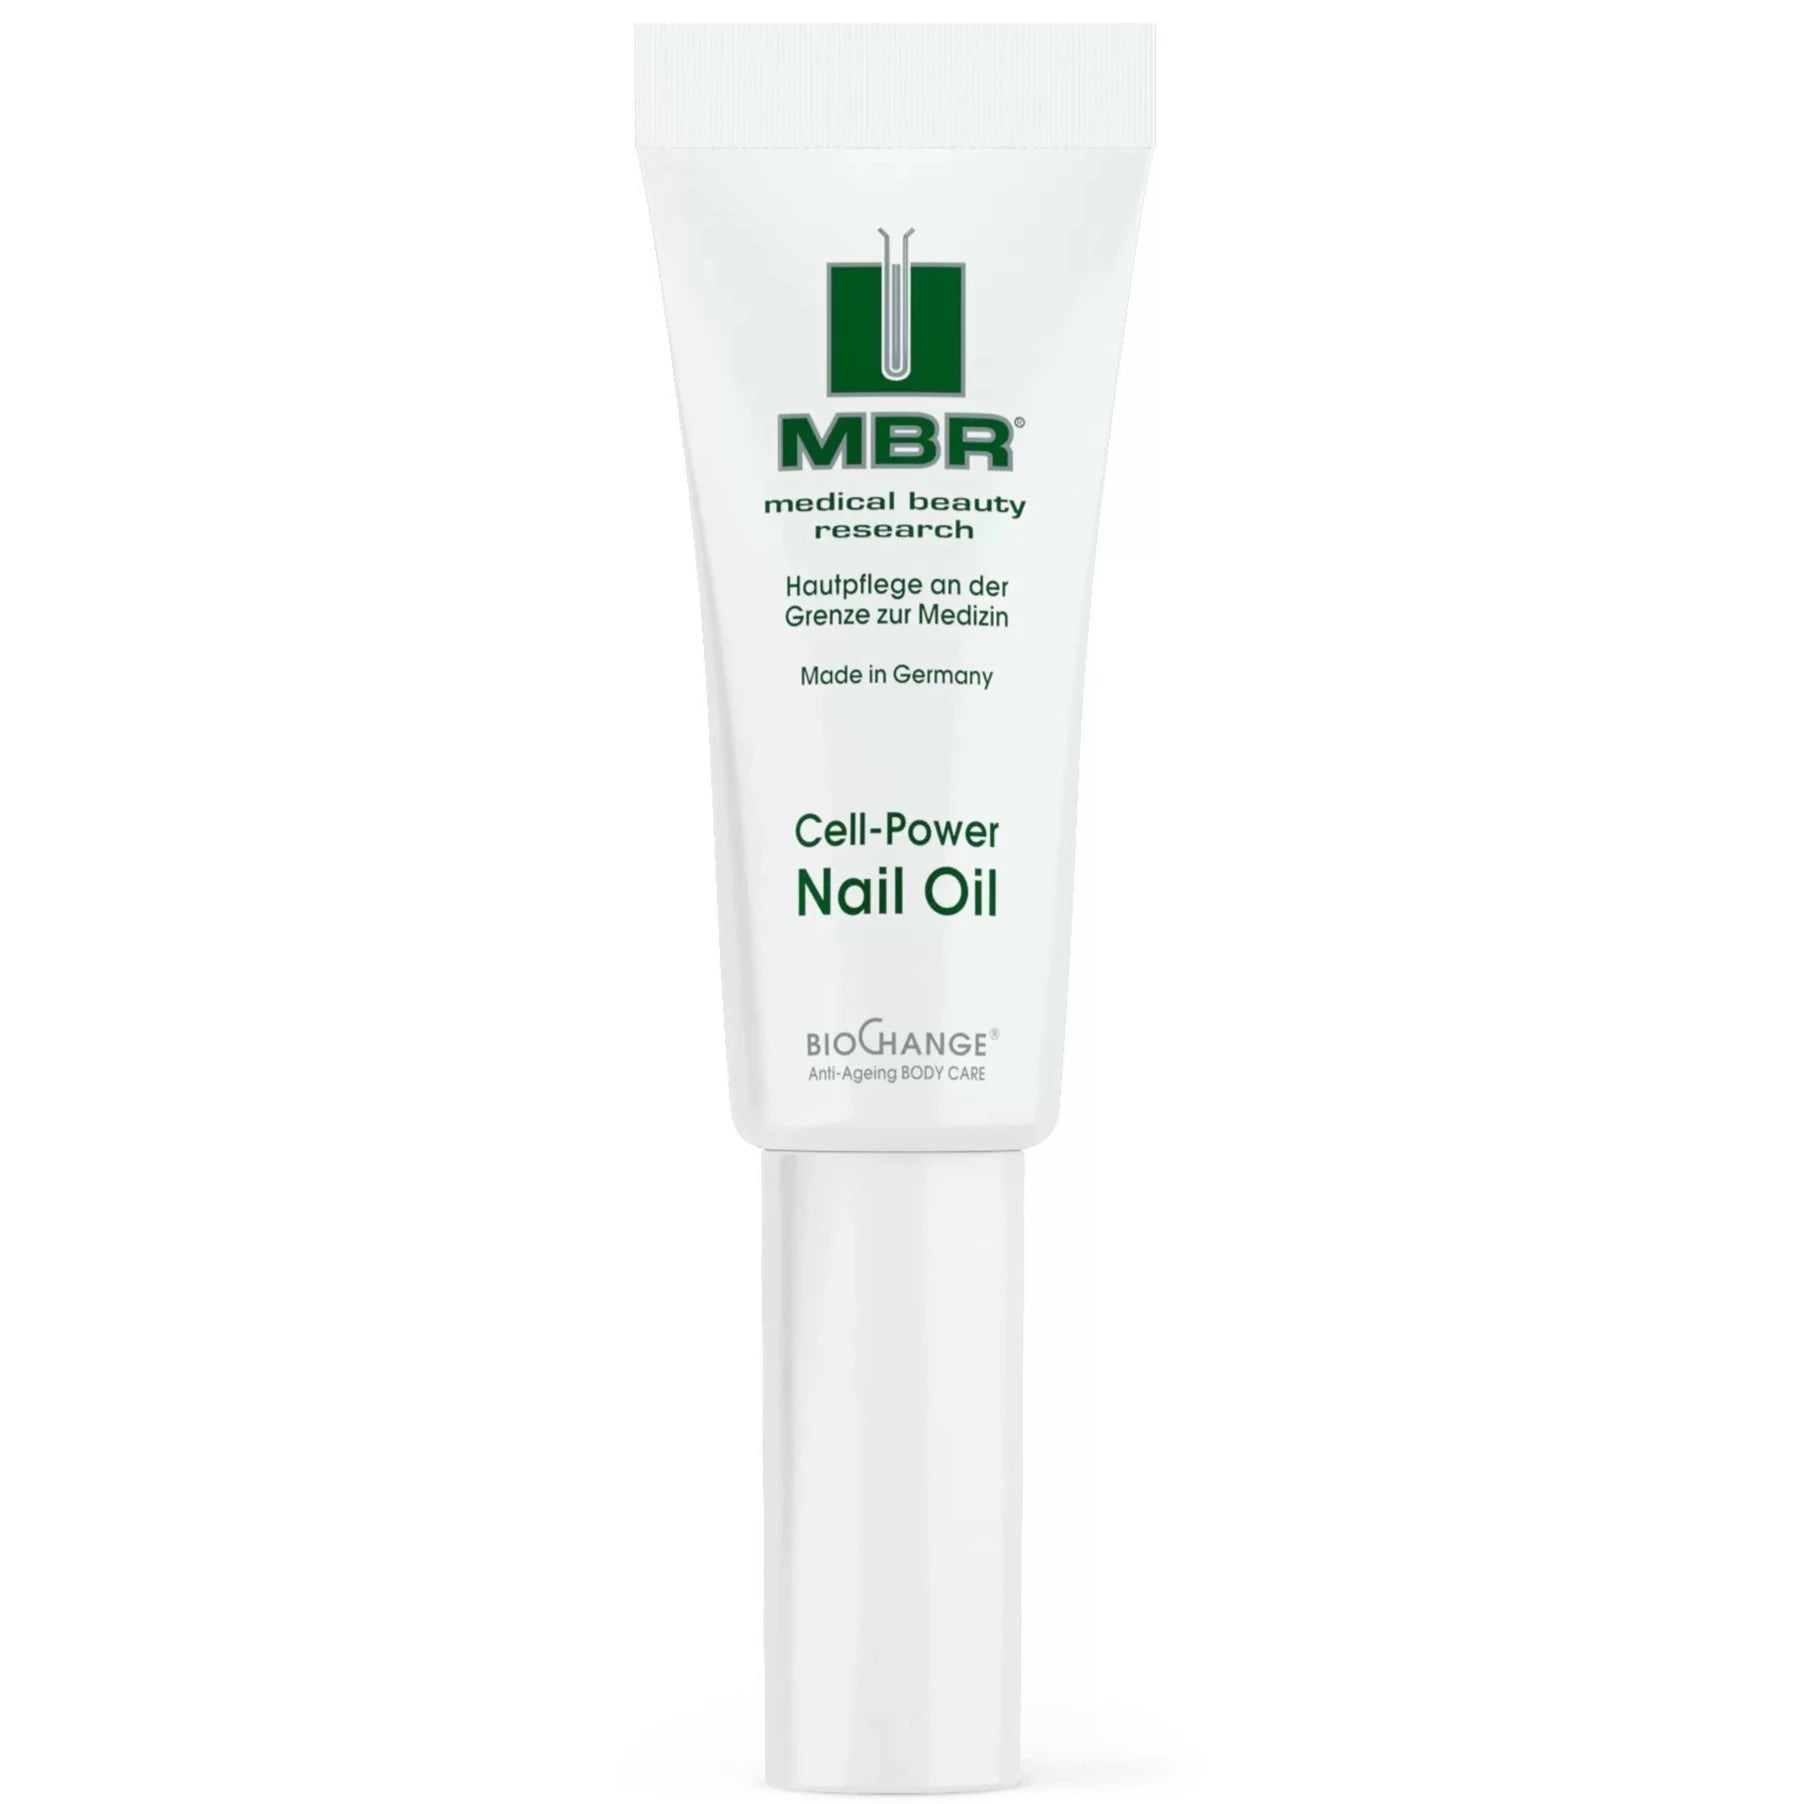 Cell-Power Nail Oil